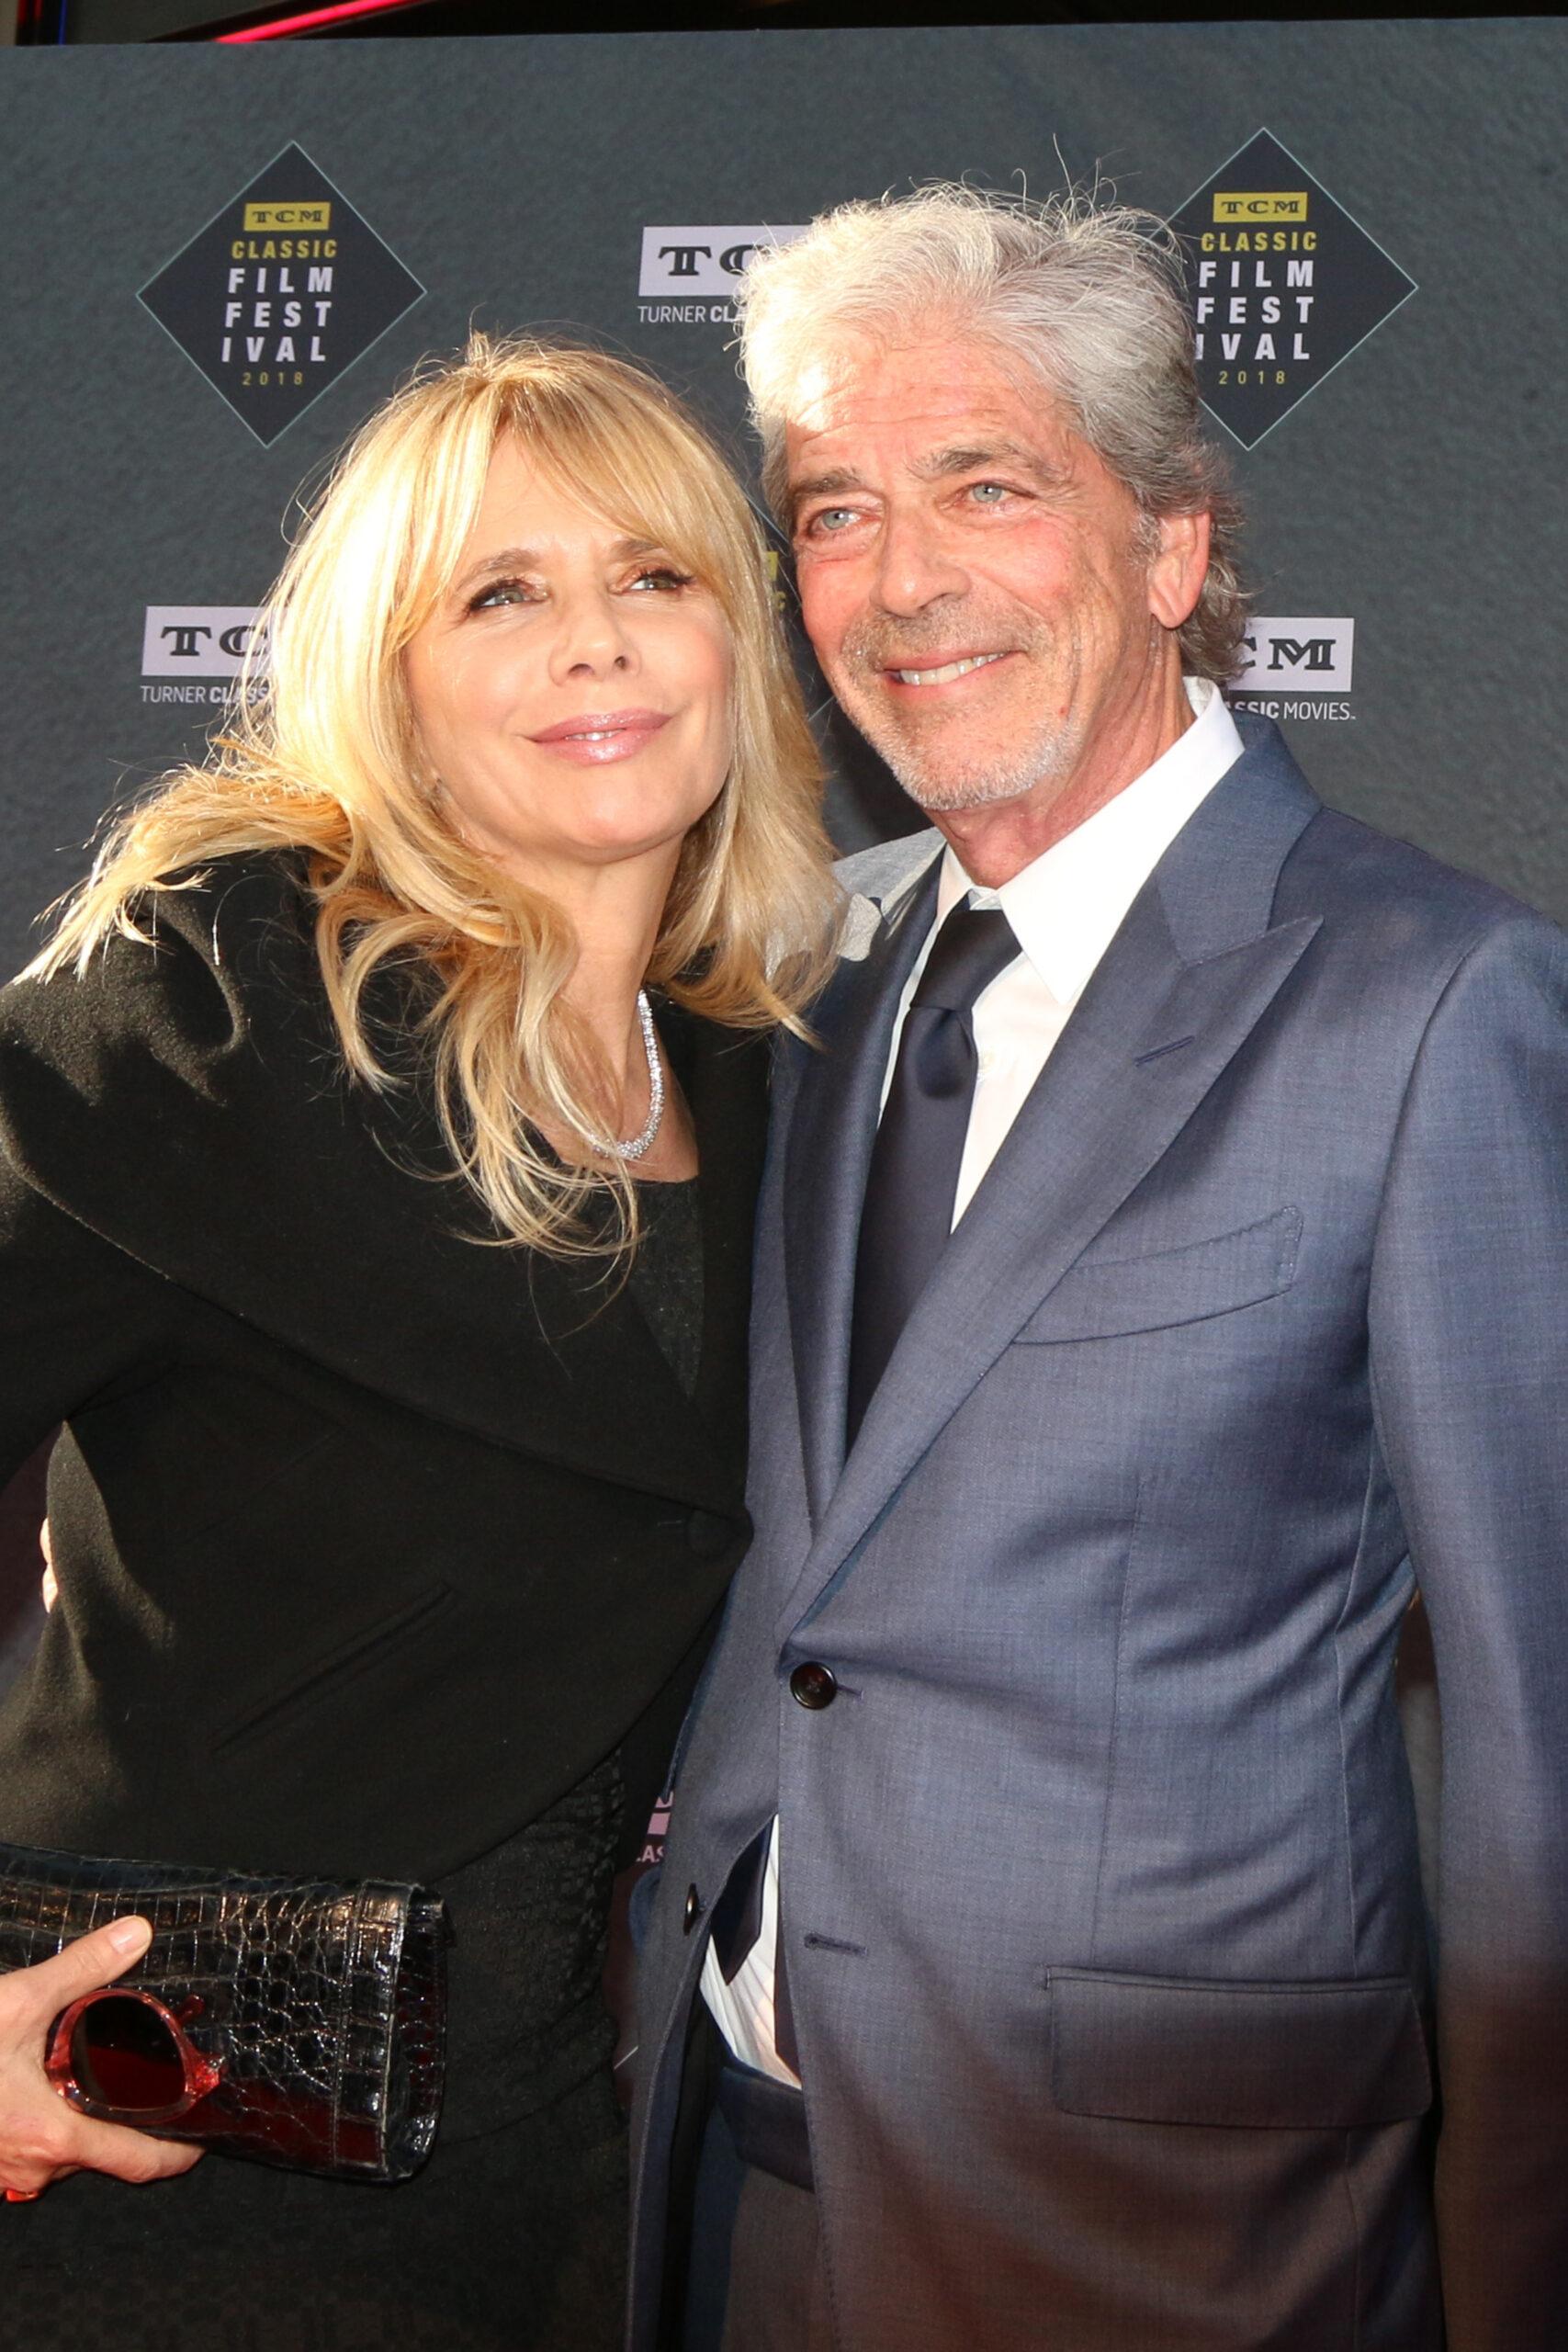 Rosanna Arquette's Husband Files For Divorce After 8 Years Of Marriage